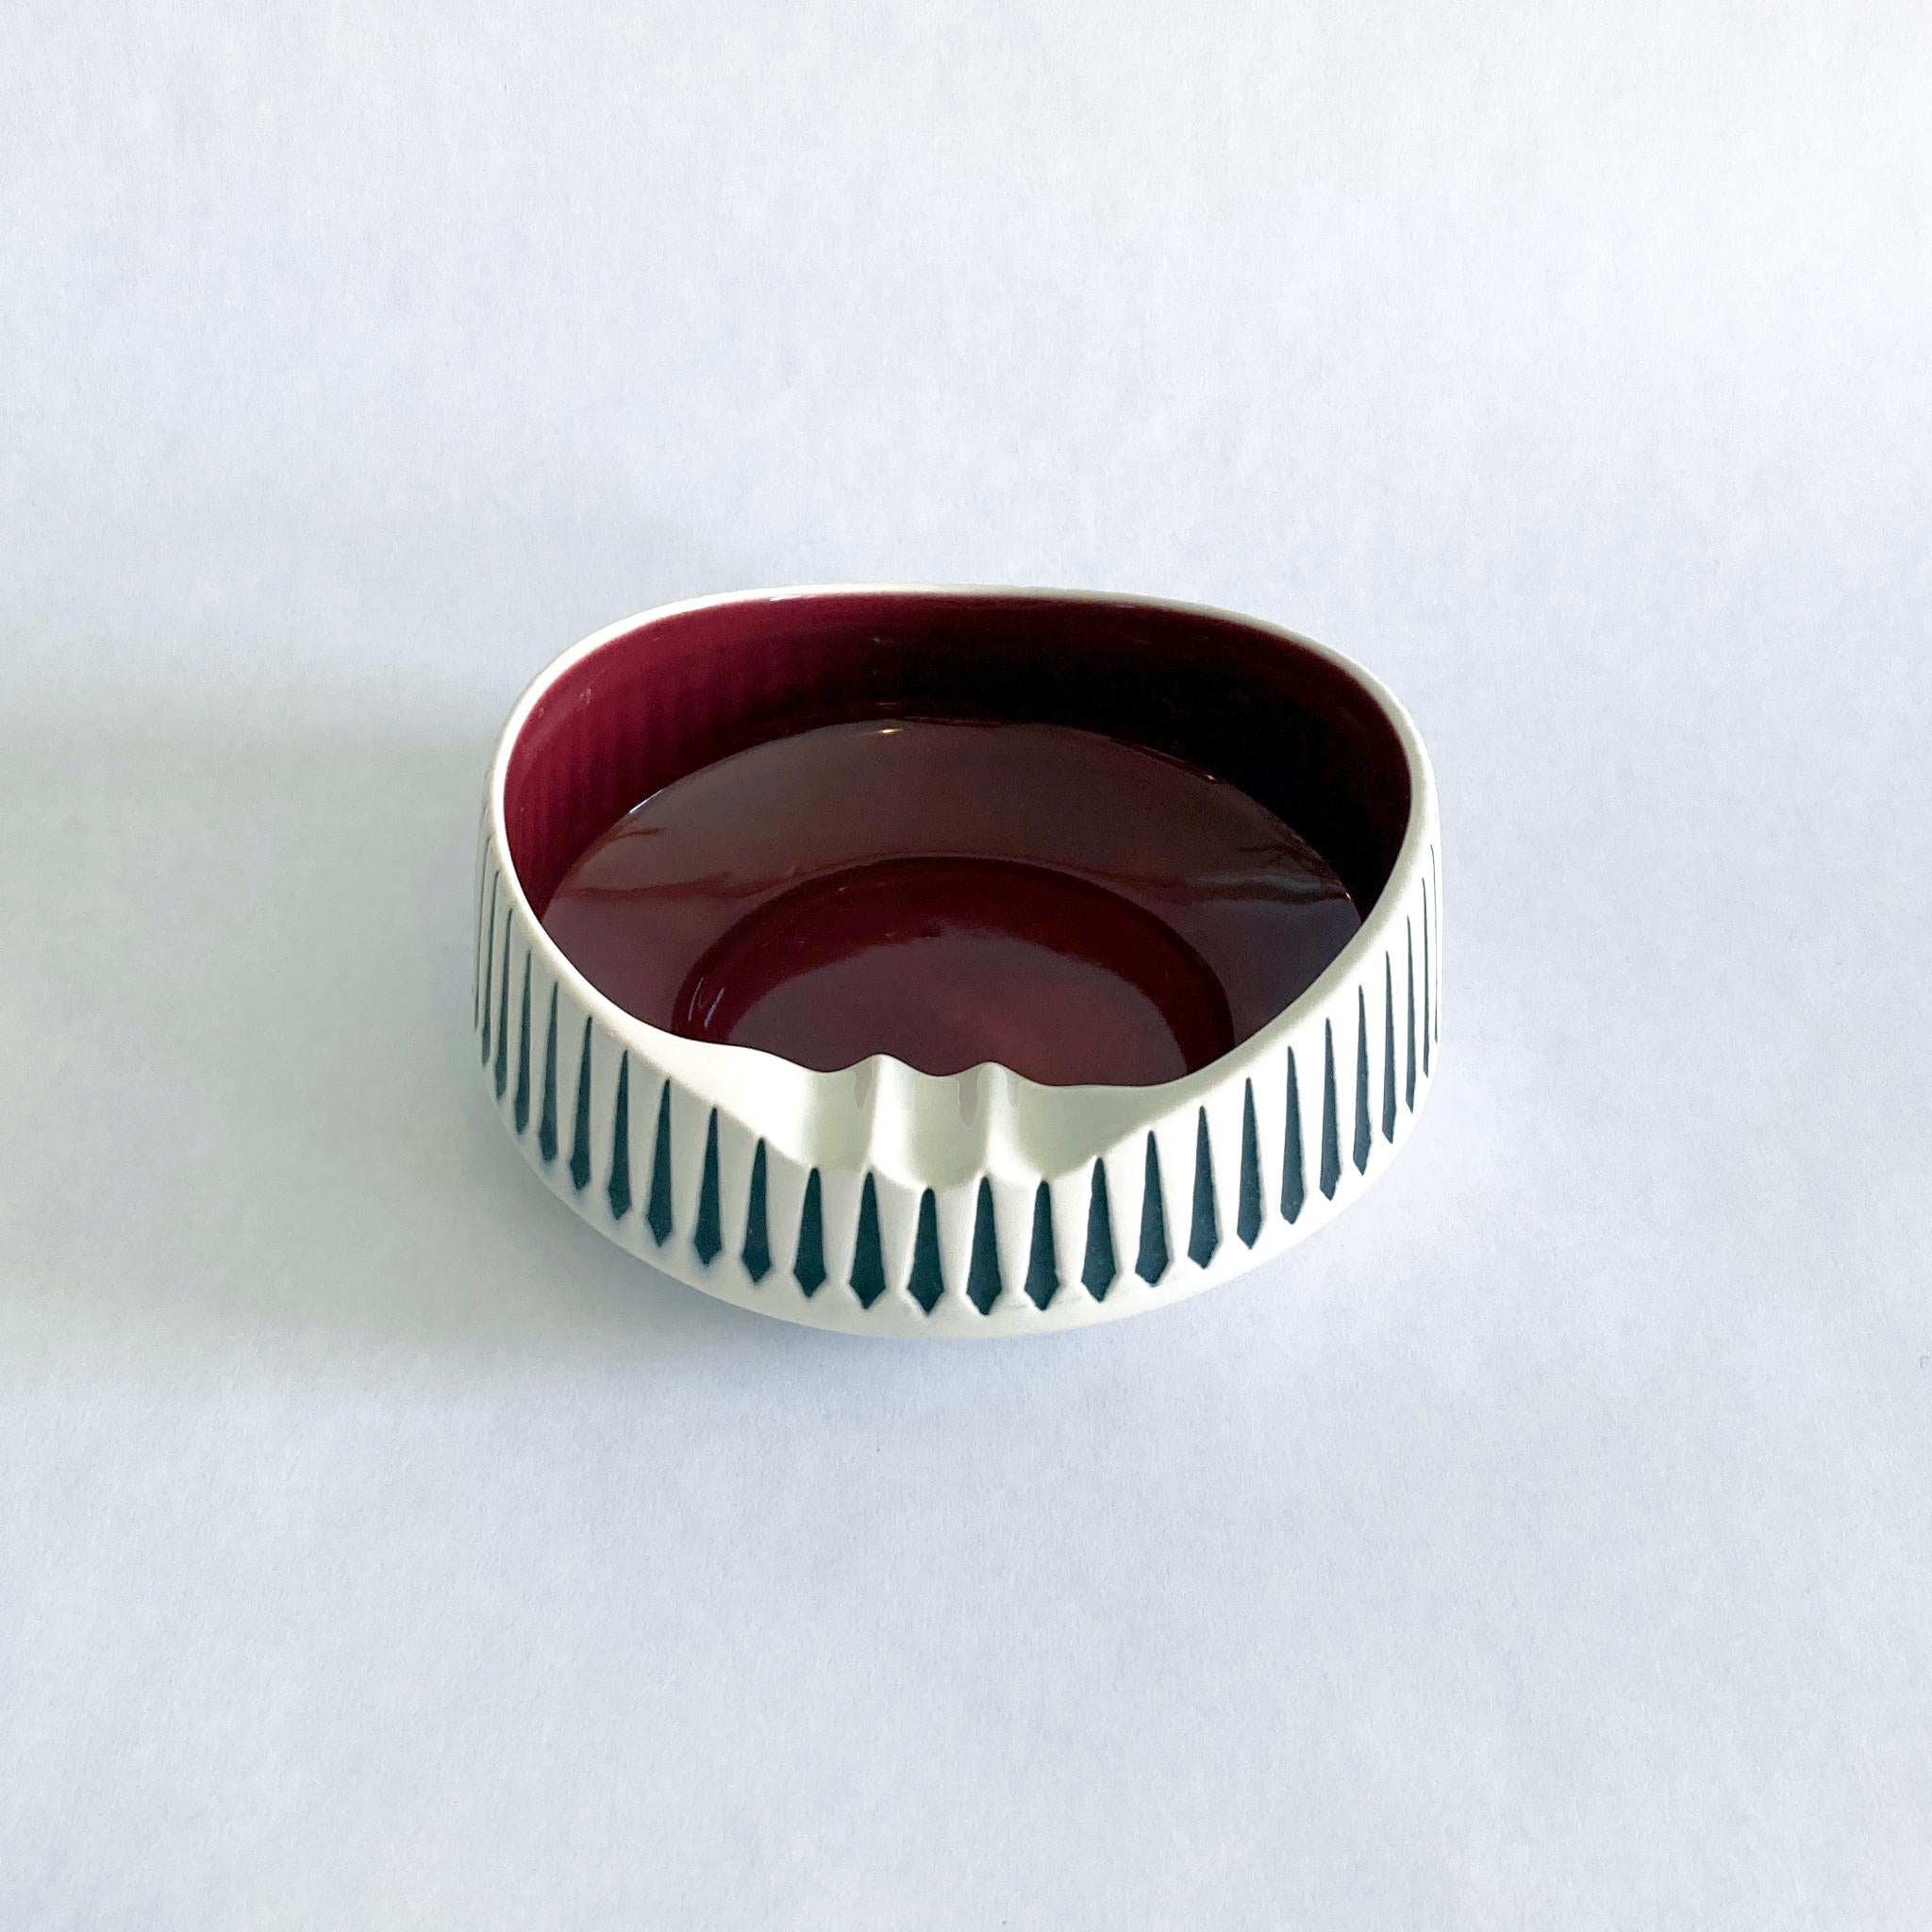 Hornsea Pottery by John Clappison Vide Poche in White, Black and Burgundy, 1950s In Good Condition For Sale In New York, NY